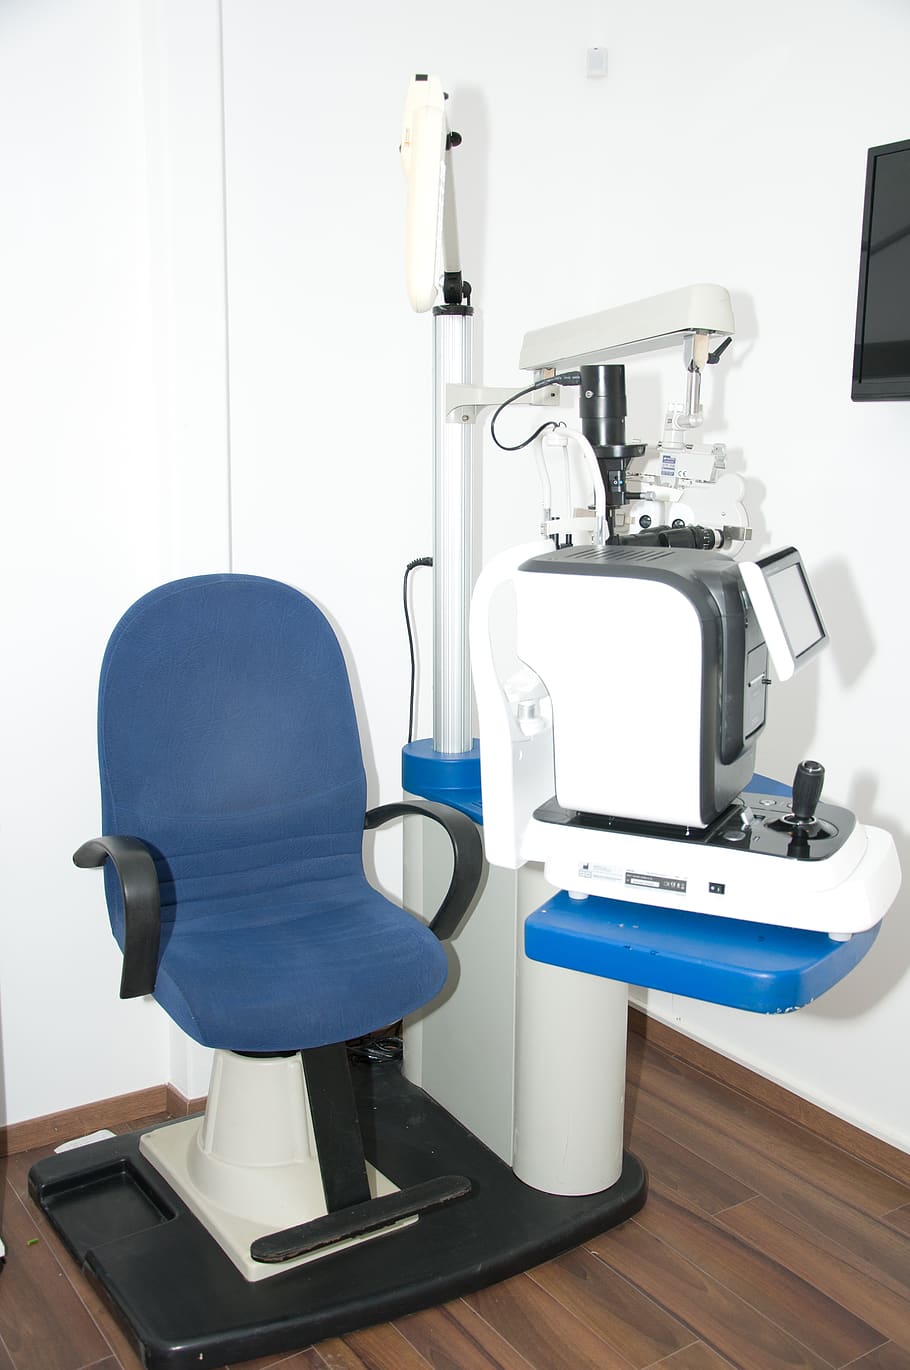 unit eye-check, eye exam, rutine eye test, indoors, seat, equipment, healthcare and medicine, chair, absence, close-up